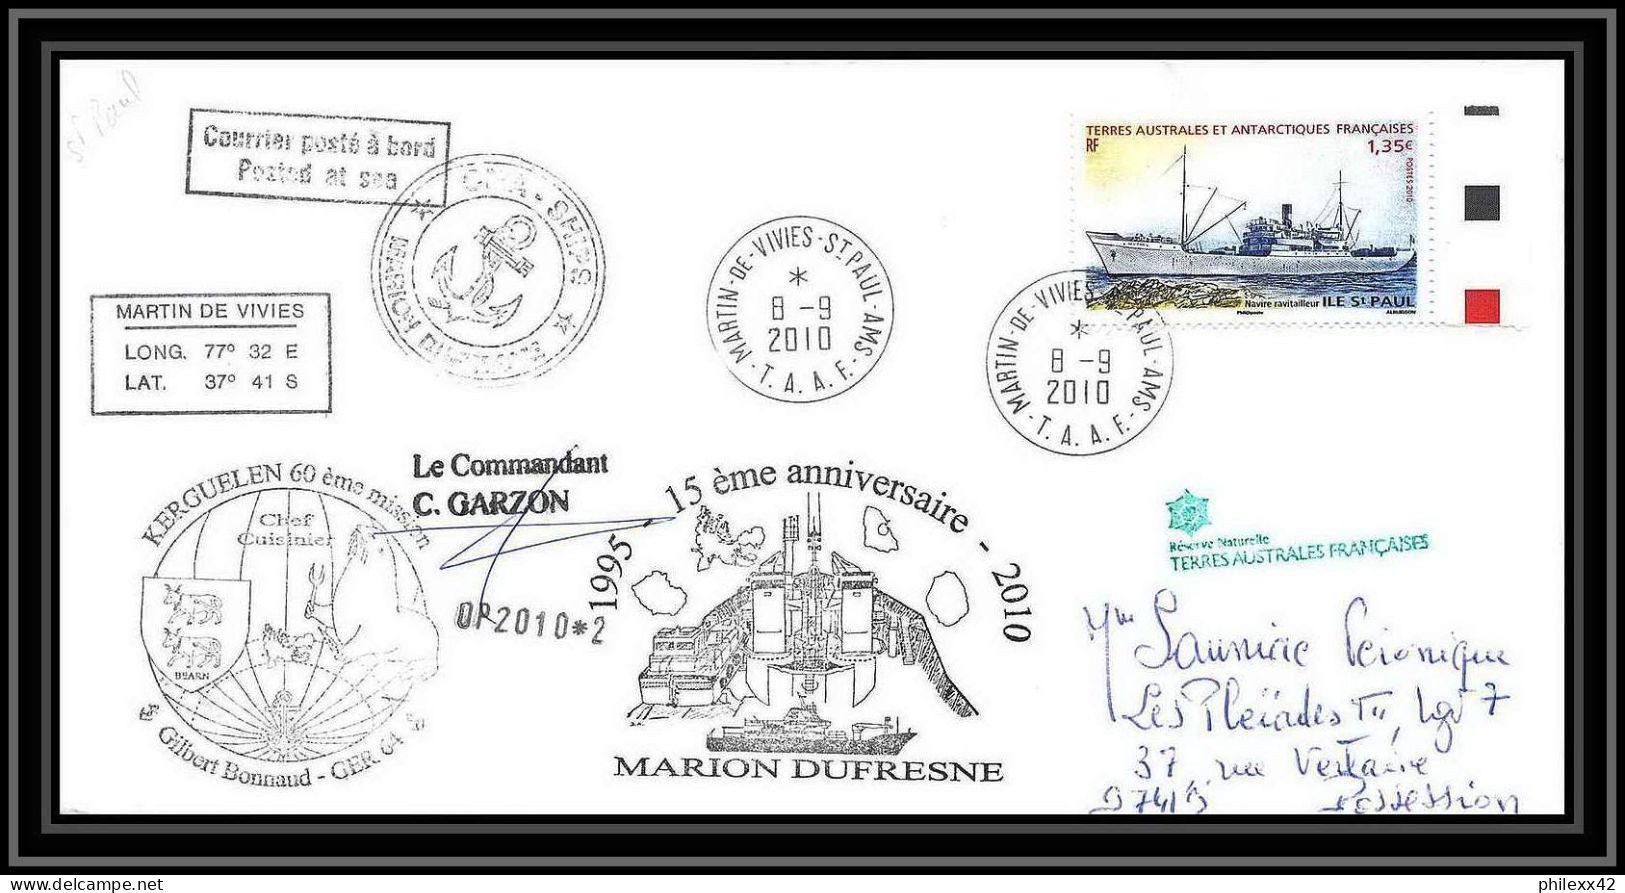 3027 Helilagon Dufresne Signé Signed Op 2010/2 St Paul 8/9/2010 N°558 ANTARCTIC Terres Australes (taaf) Lettre Cover - Hélicoptères